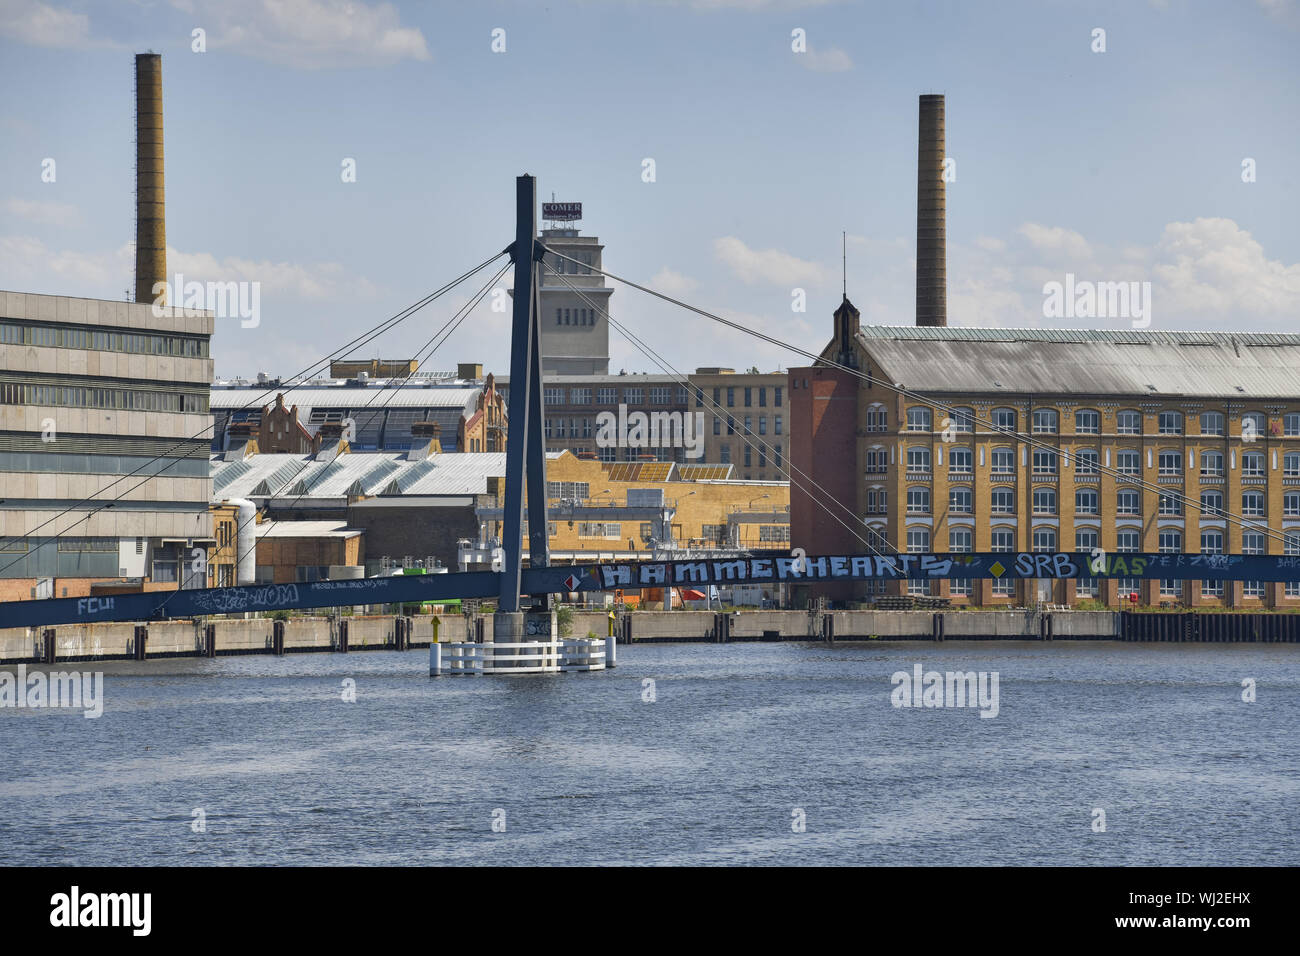 View, Outside, Outside, outside view, outside view, Berlin, Germany, river, river, hall, cable works Oberspree, KWO, warehouse, upper nice pasture, up Stock Photo